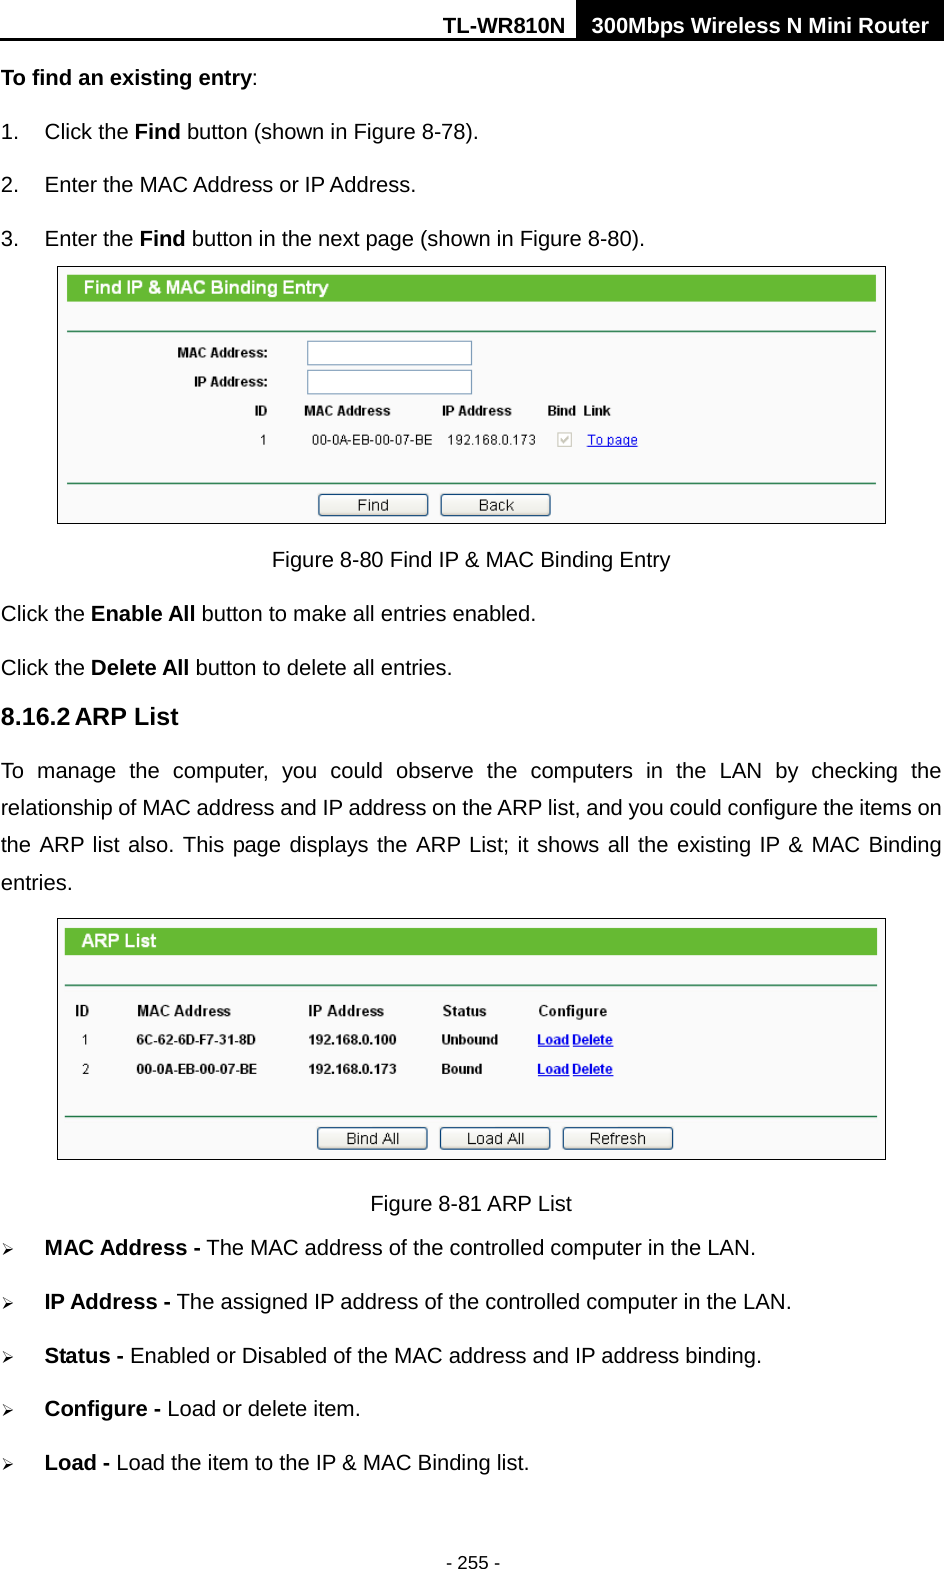 TL-WR810N 300Mbps Wireless N Mini Router  - 255 - To find an existing entry: 1. Click the Find button (shown in Figure 8-78).   2. Enter the MAC Address or IP Address. 3. Enter the Find button in the next page (shown in Figure 8-80).  Figure 8-80 Find IP &amp; MAC Binding Entry Click the Enable All button to make all entries enabled. Click the Delete All button to delete all entries. 8.16.2 ARP List To manage the computer, you could observe the computers in the LAN by checking the relationship of MAC address and IP address on the ARP list, and you could configure the items on the ARP list also. This page displays the ARP List; it shows all the existing IP &amp; MAC Binding entries.  Figure 8-81 ARP List  MAC Address - The MAC address of the controlled computer in the LAN.  IP Address - The assigned IP address of the controlled computer in the LAN.  Status - Enabled or Disabled of the MAC address and IP address binding.  Configure - Load or delete item.  Load - Load the item to the IP &amp; MAC Binding list. 